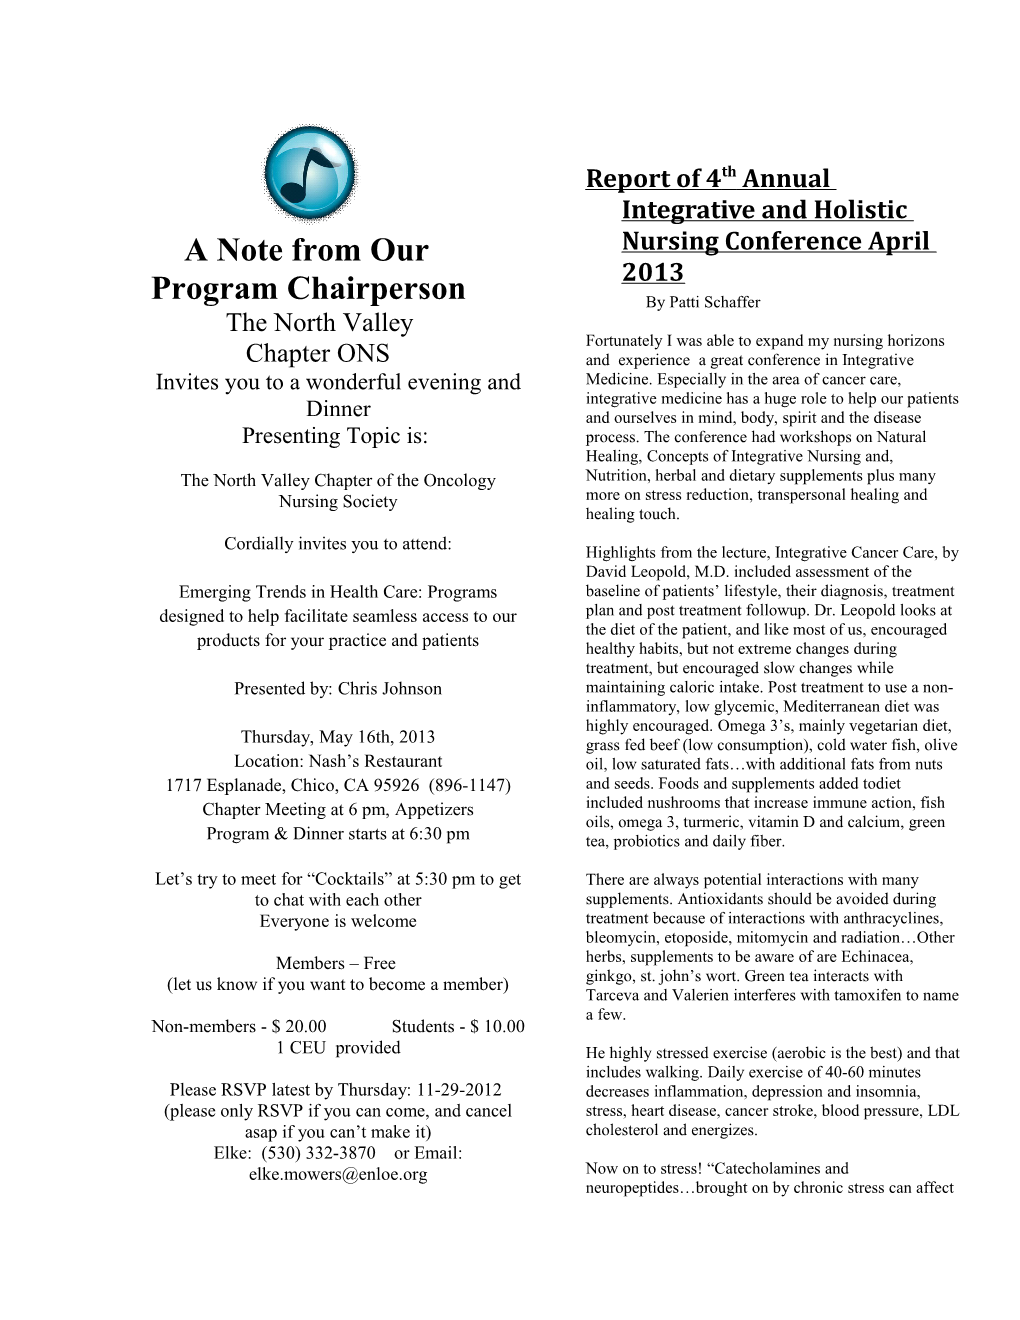 Chapter of the Oncology Nursing Society